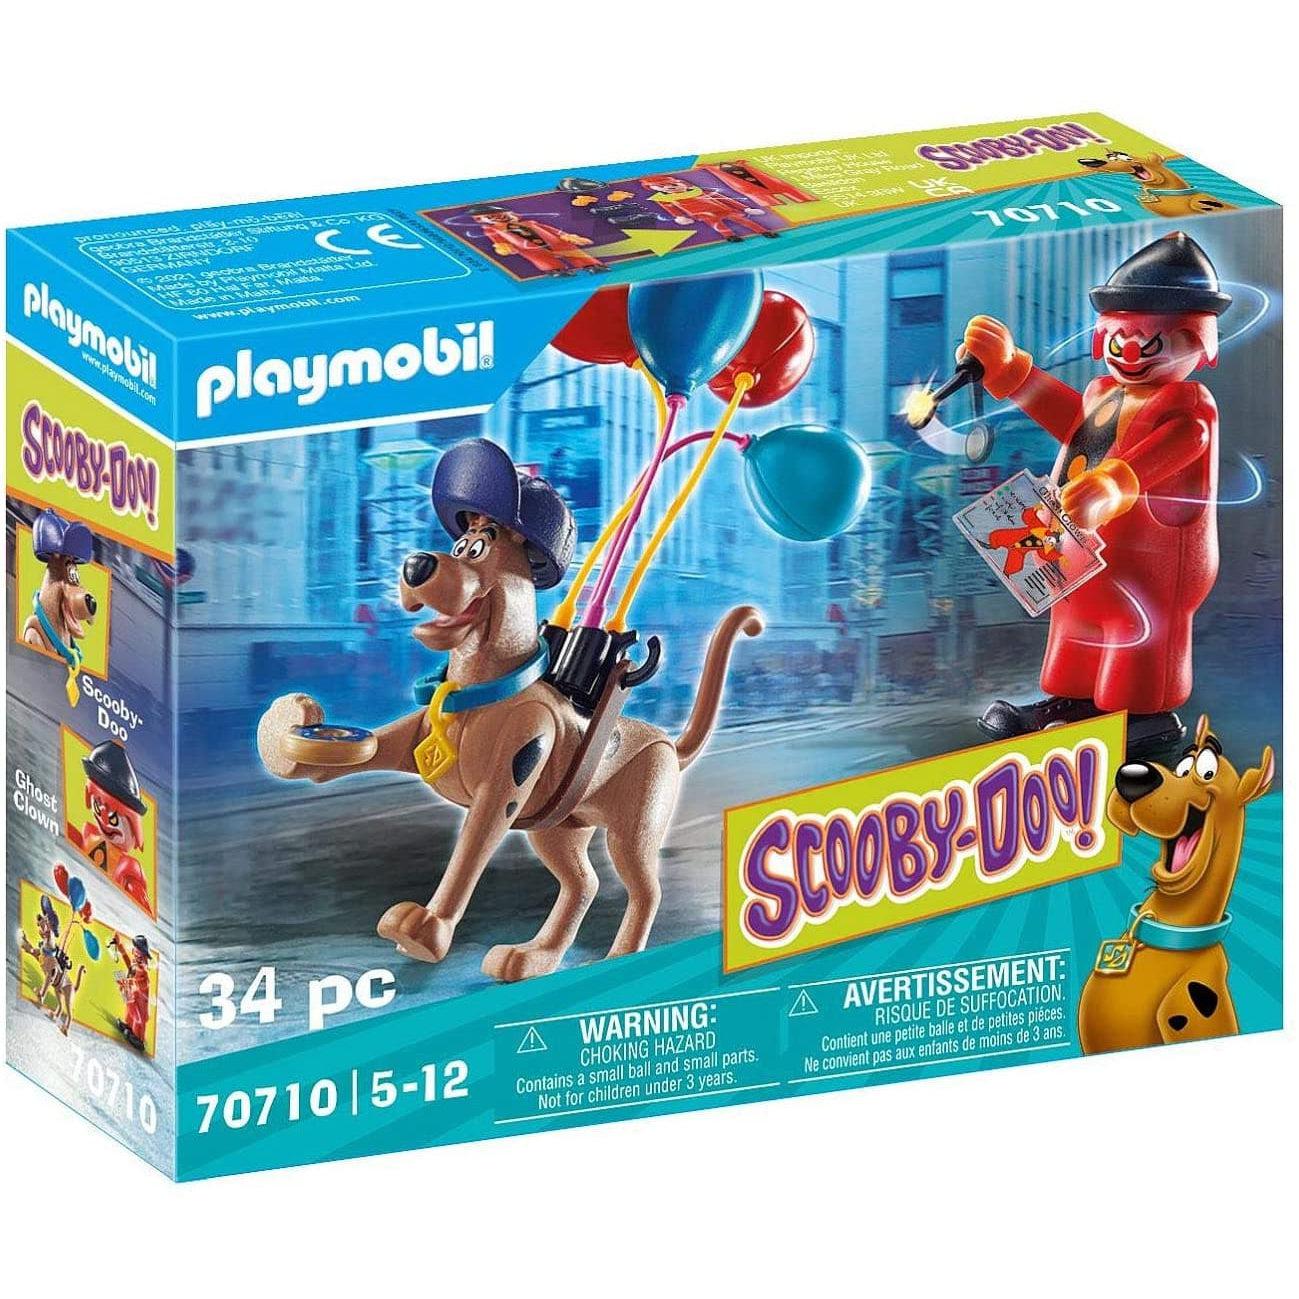 Playmobil-SCOOBY-DOO! Adventure with Ghost Clown-70710-Legacy Toys